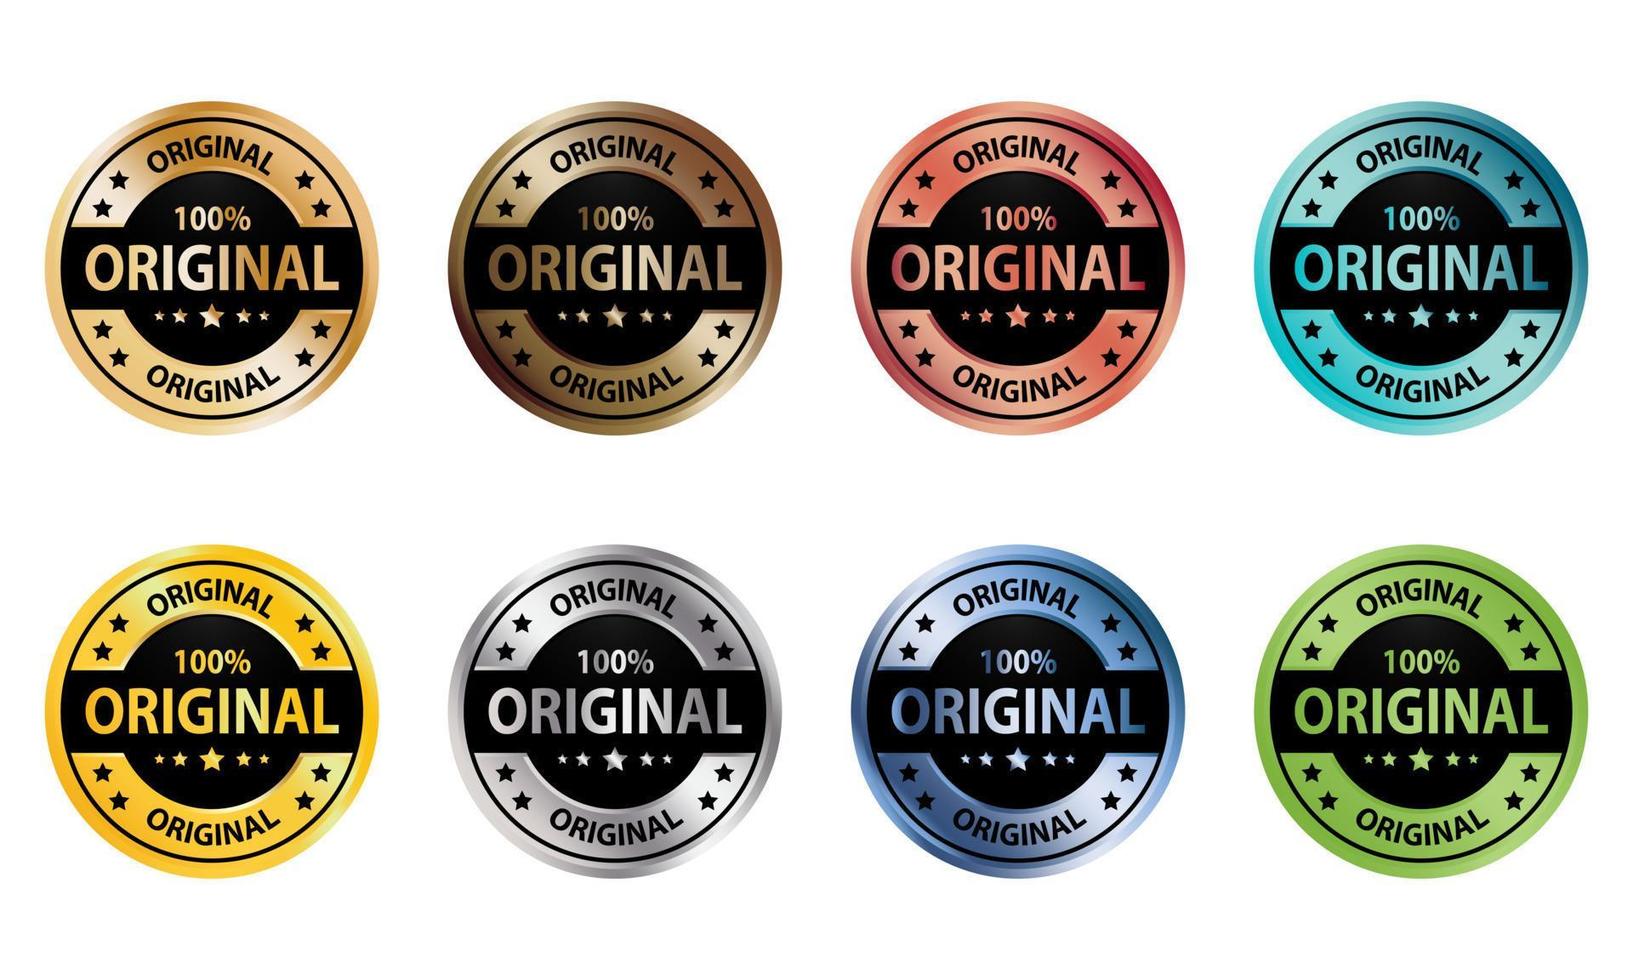 Collection of original round badge labels in various colors with metal textures vector